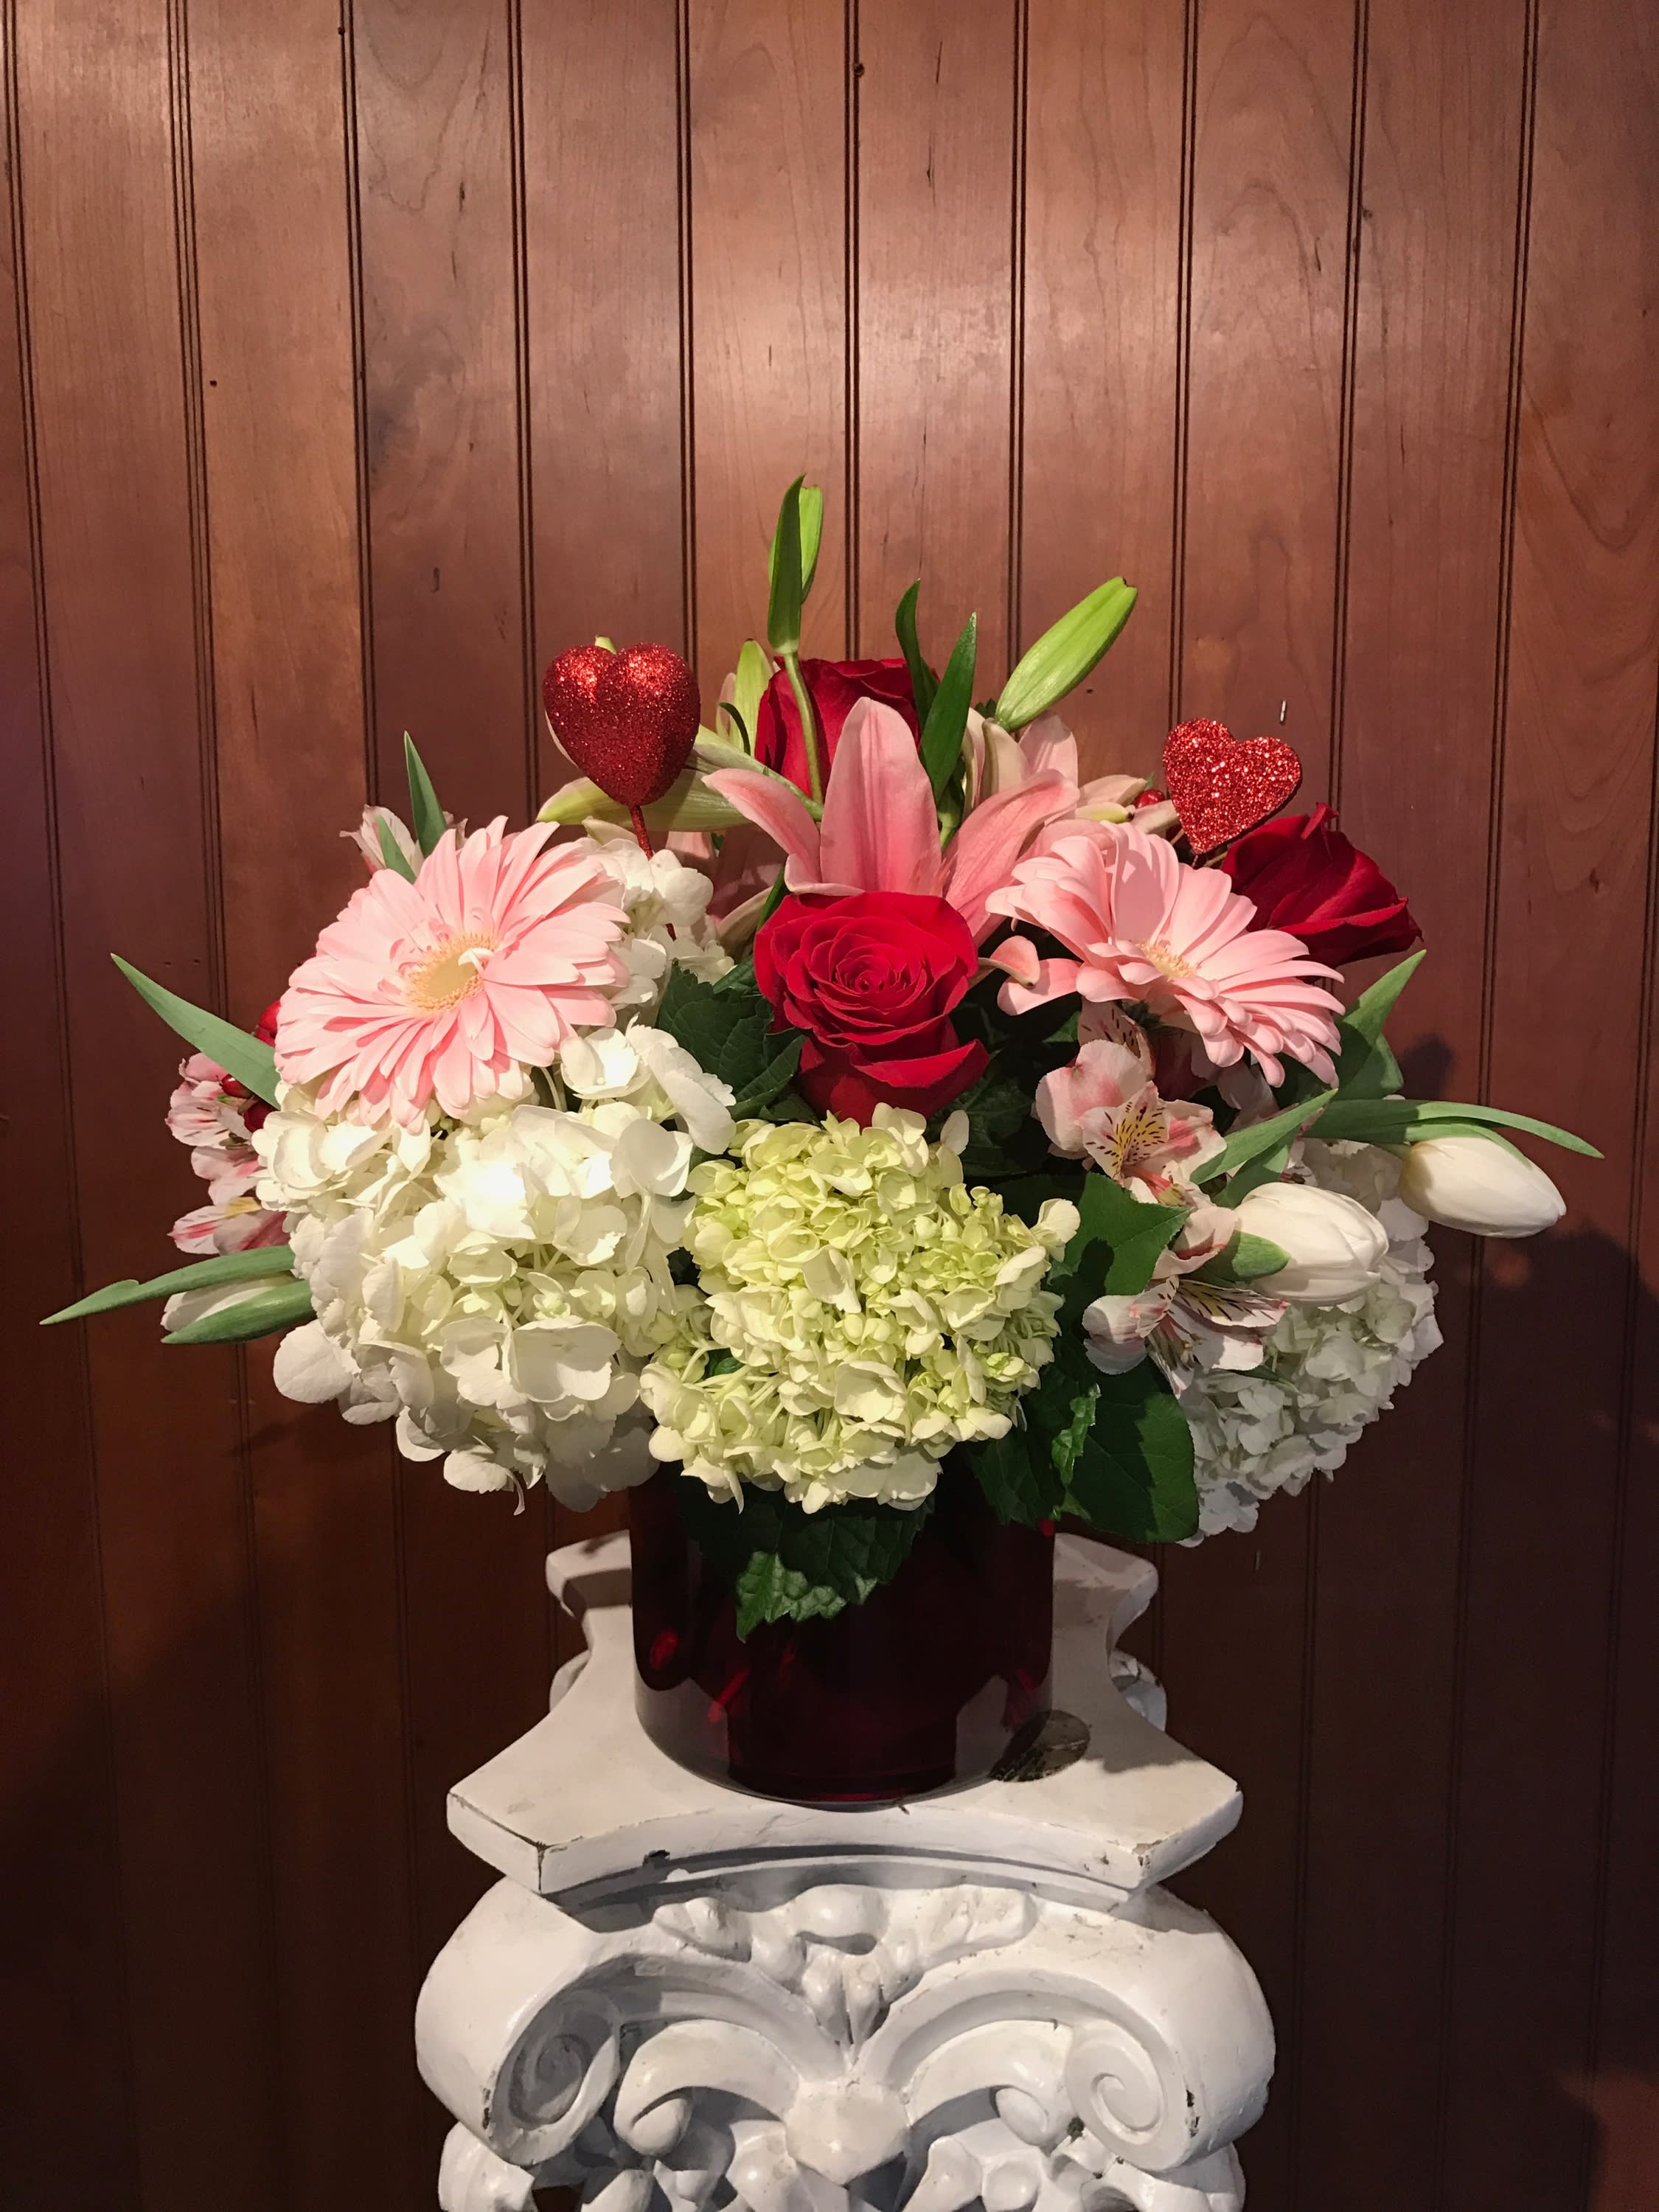 Floral Romance - Beautifully designed flowers in glass cylinder roses, hydrangea, tulips gerbera daisies!!